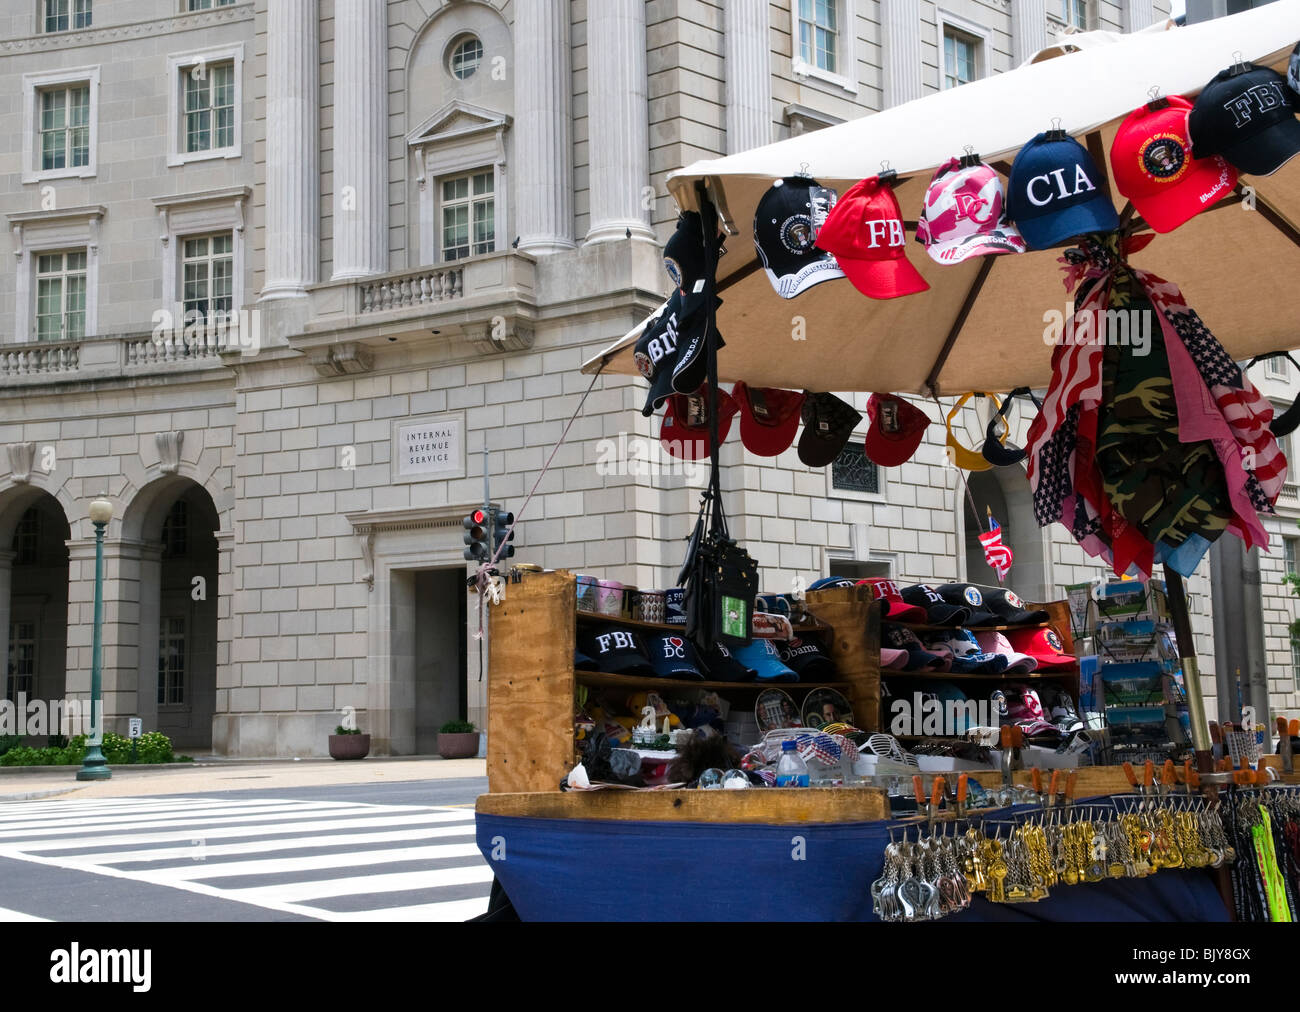 The Internal Revenue Service Building in Washington DC with a street vendor in the foreground. Stock Photo